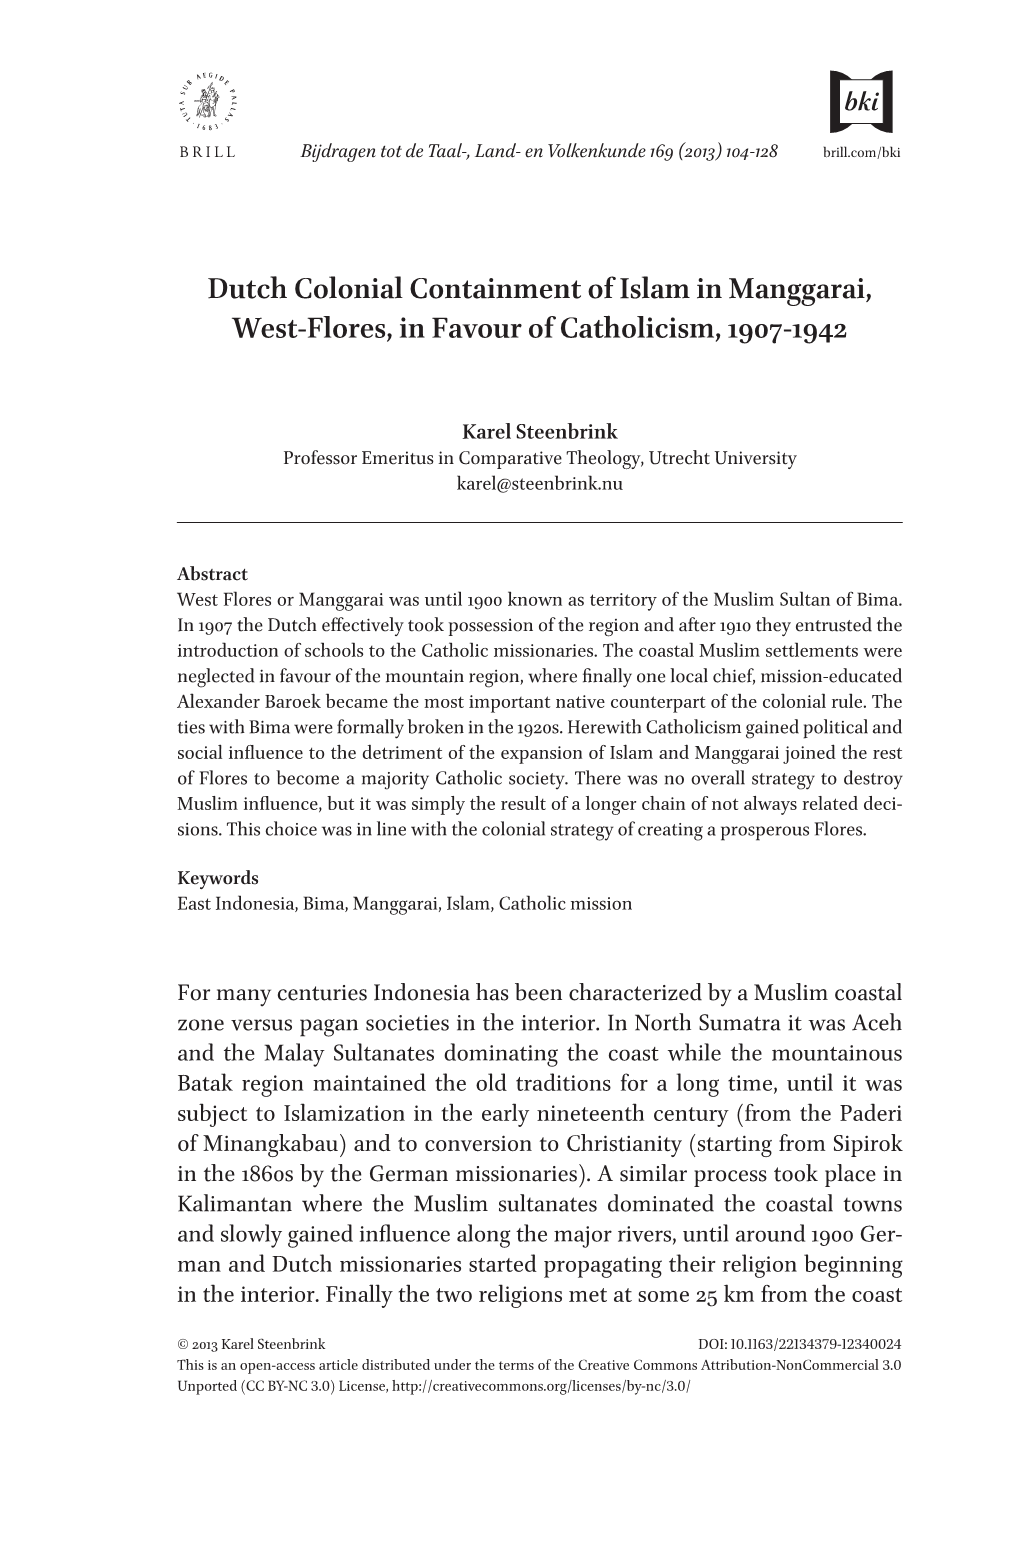 Dutch Colonial Containment of Islam in Manggarai, West-Flores, in Favour of Catholicism, 1907-1942